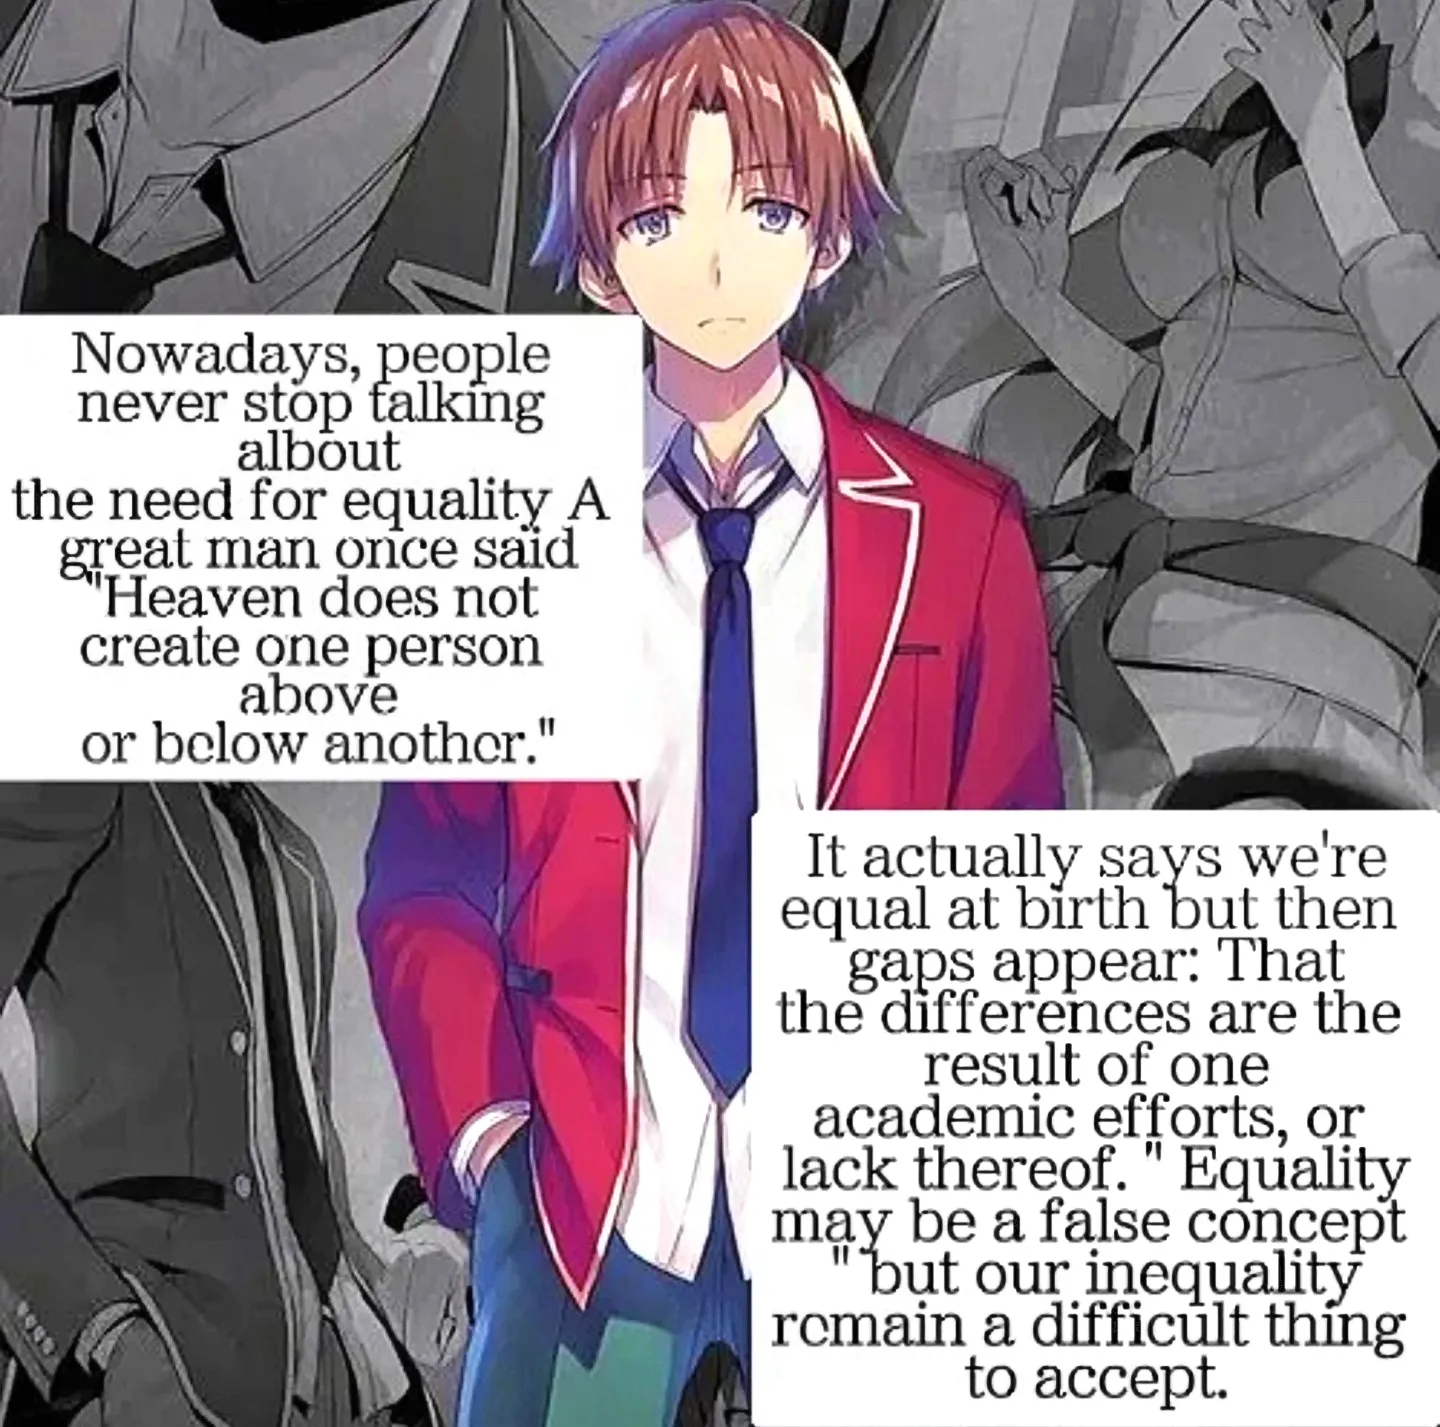 10 Facts About Kiyotaka Ayanokouji, Who Sees People as Means to